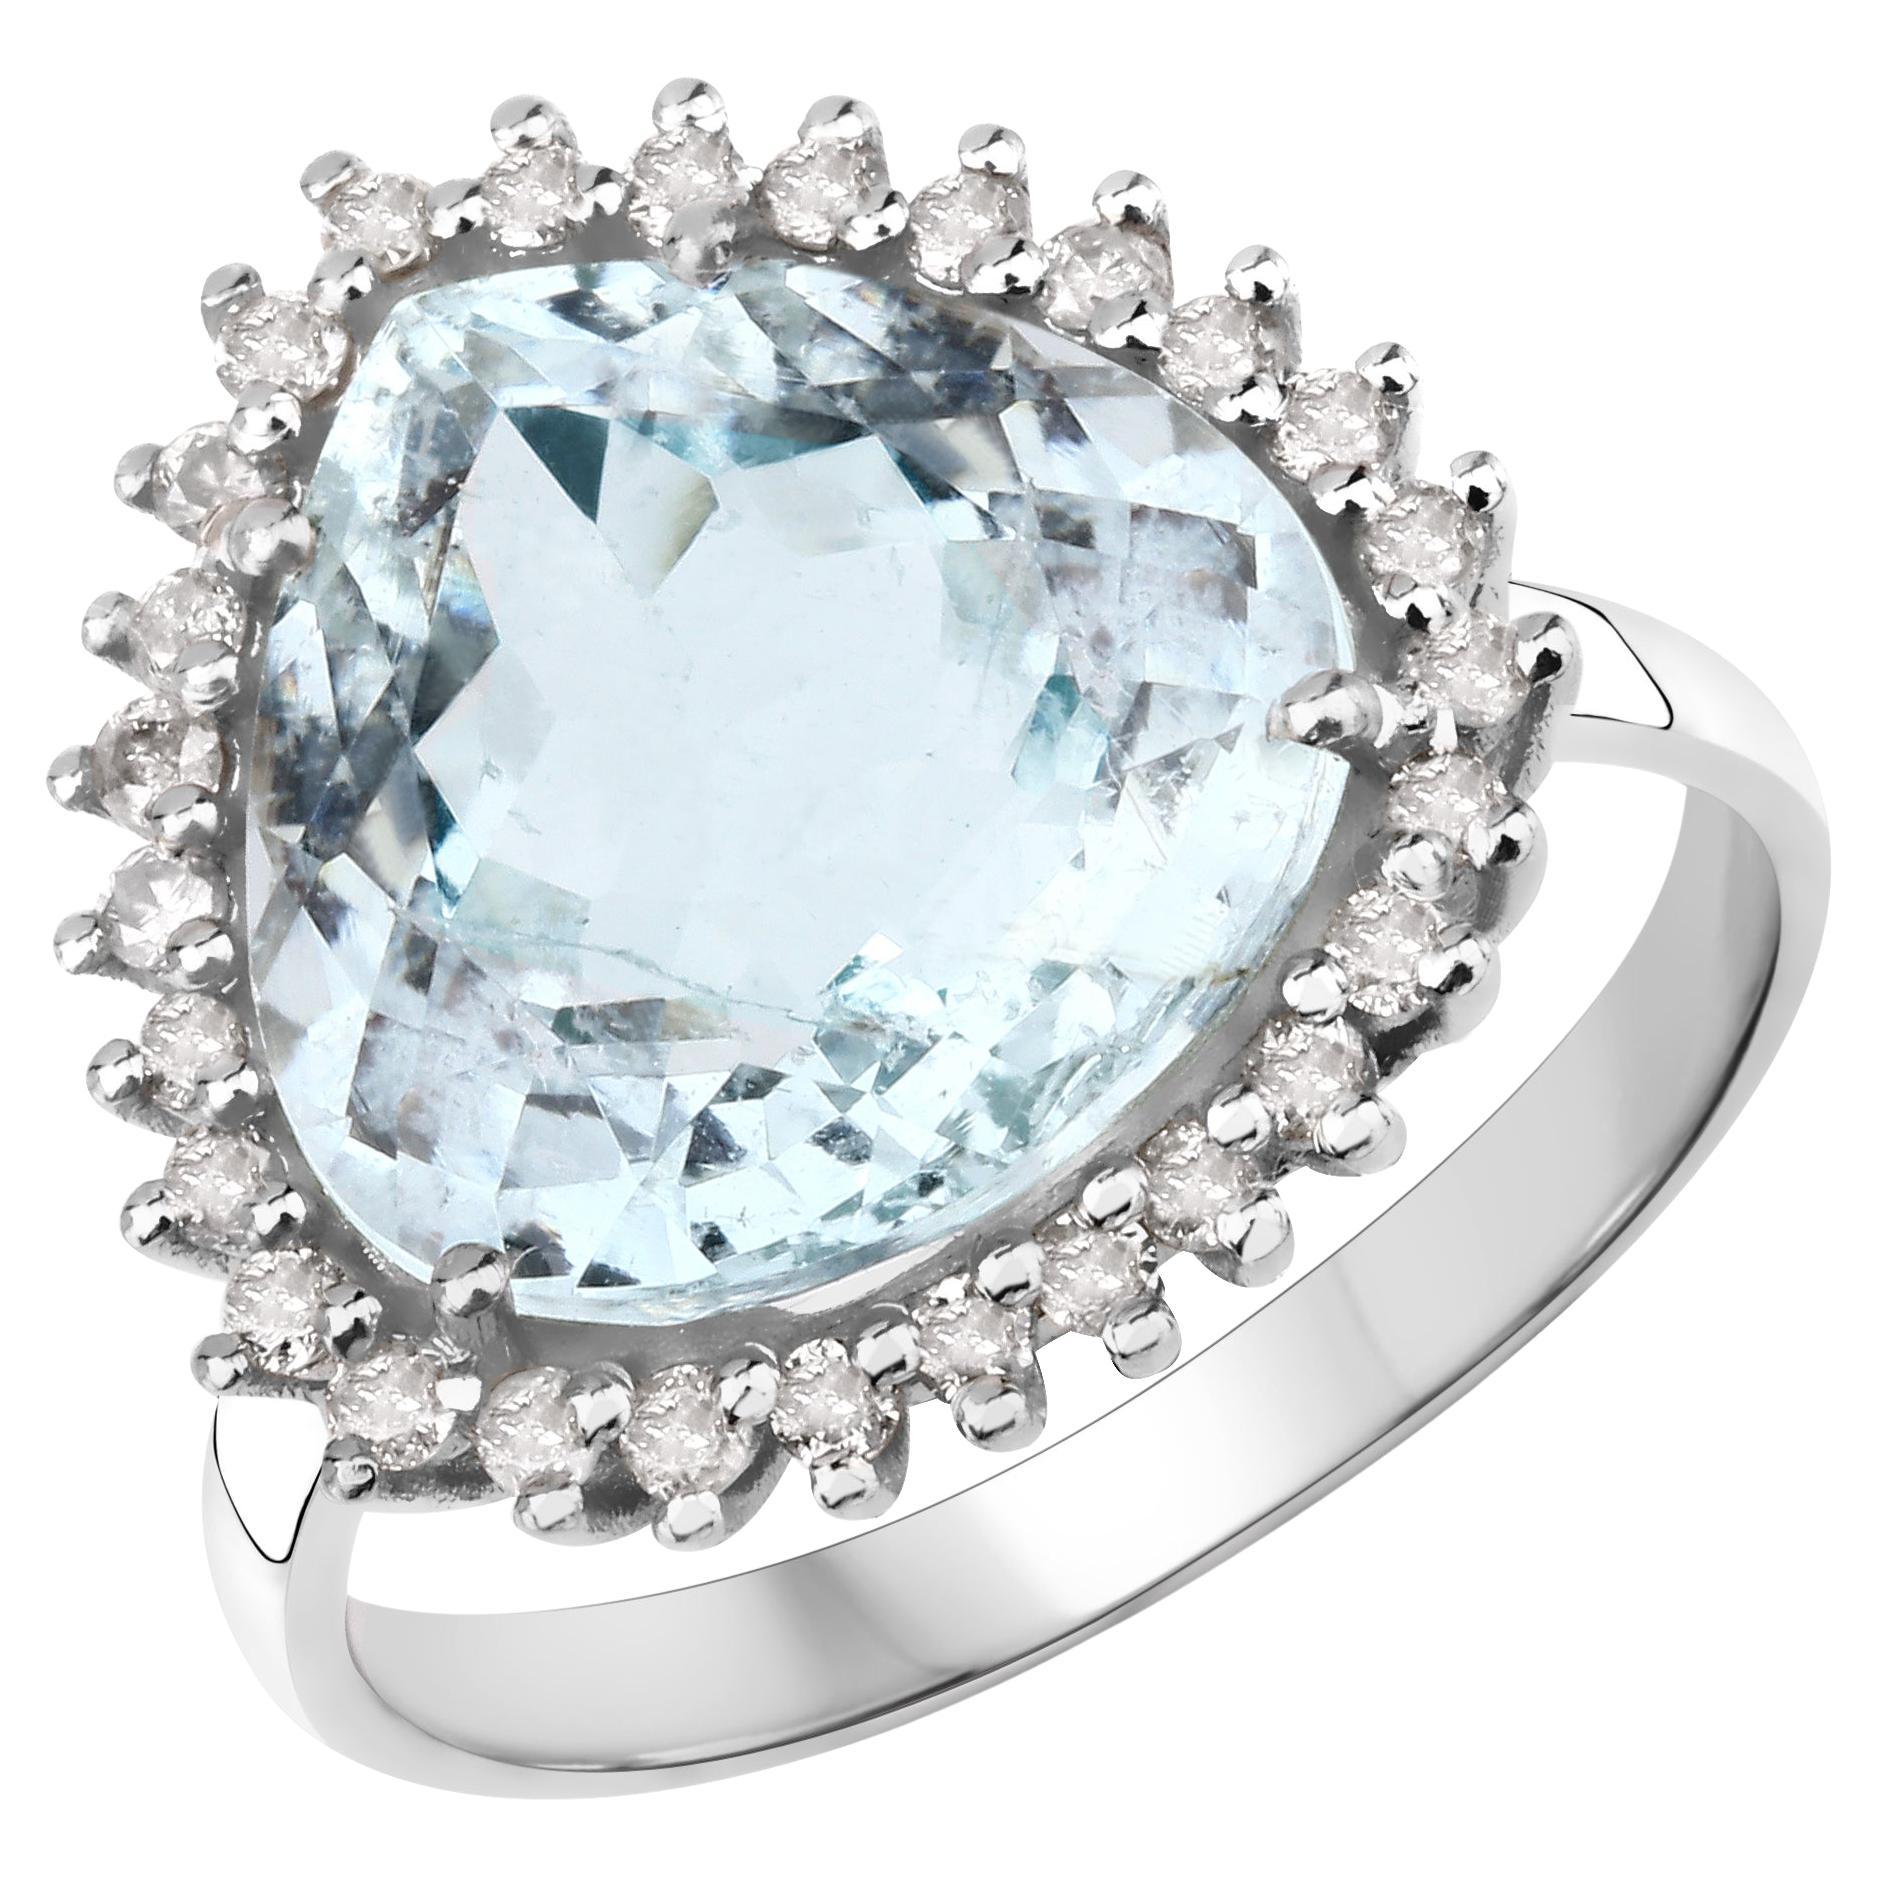 6.40cttw Aquamarine with Diamonds 0.45cttw Halo Sterling Silver Ring